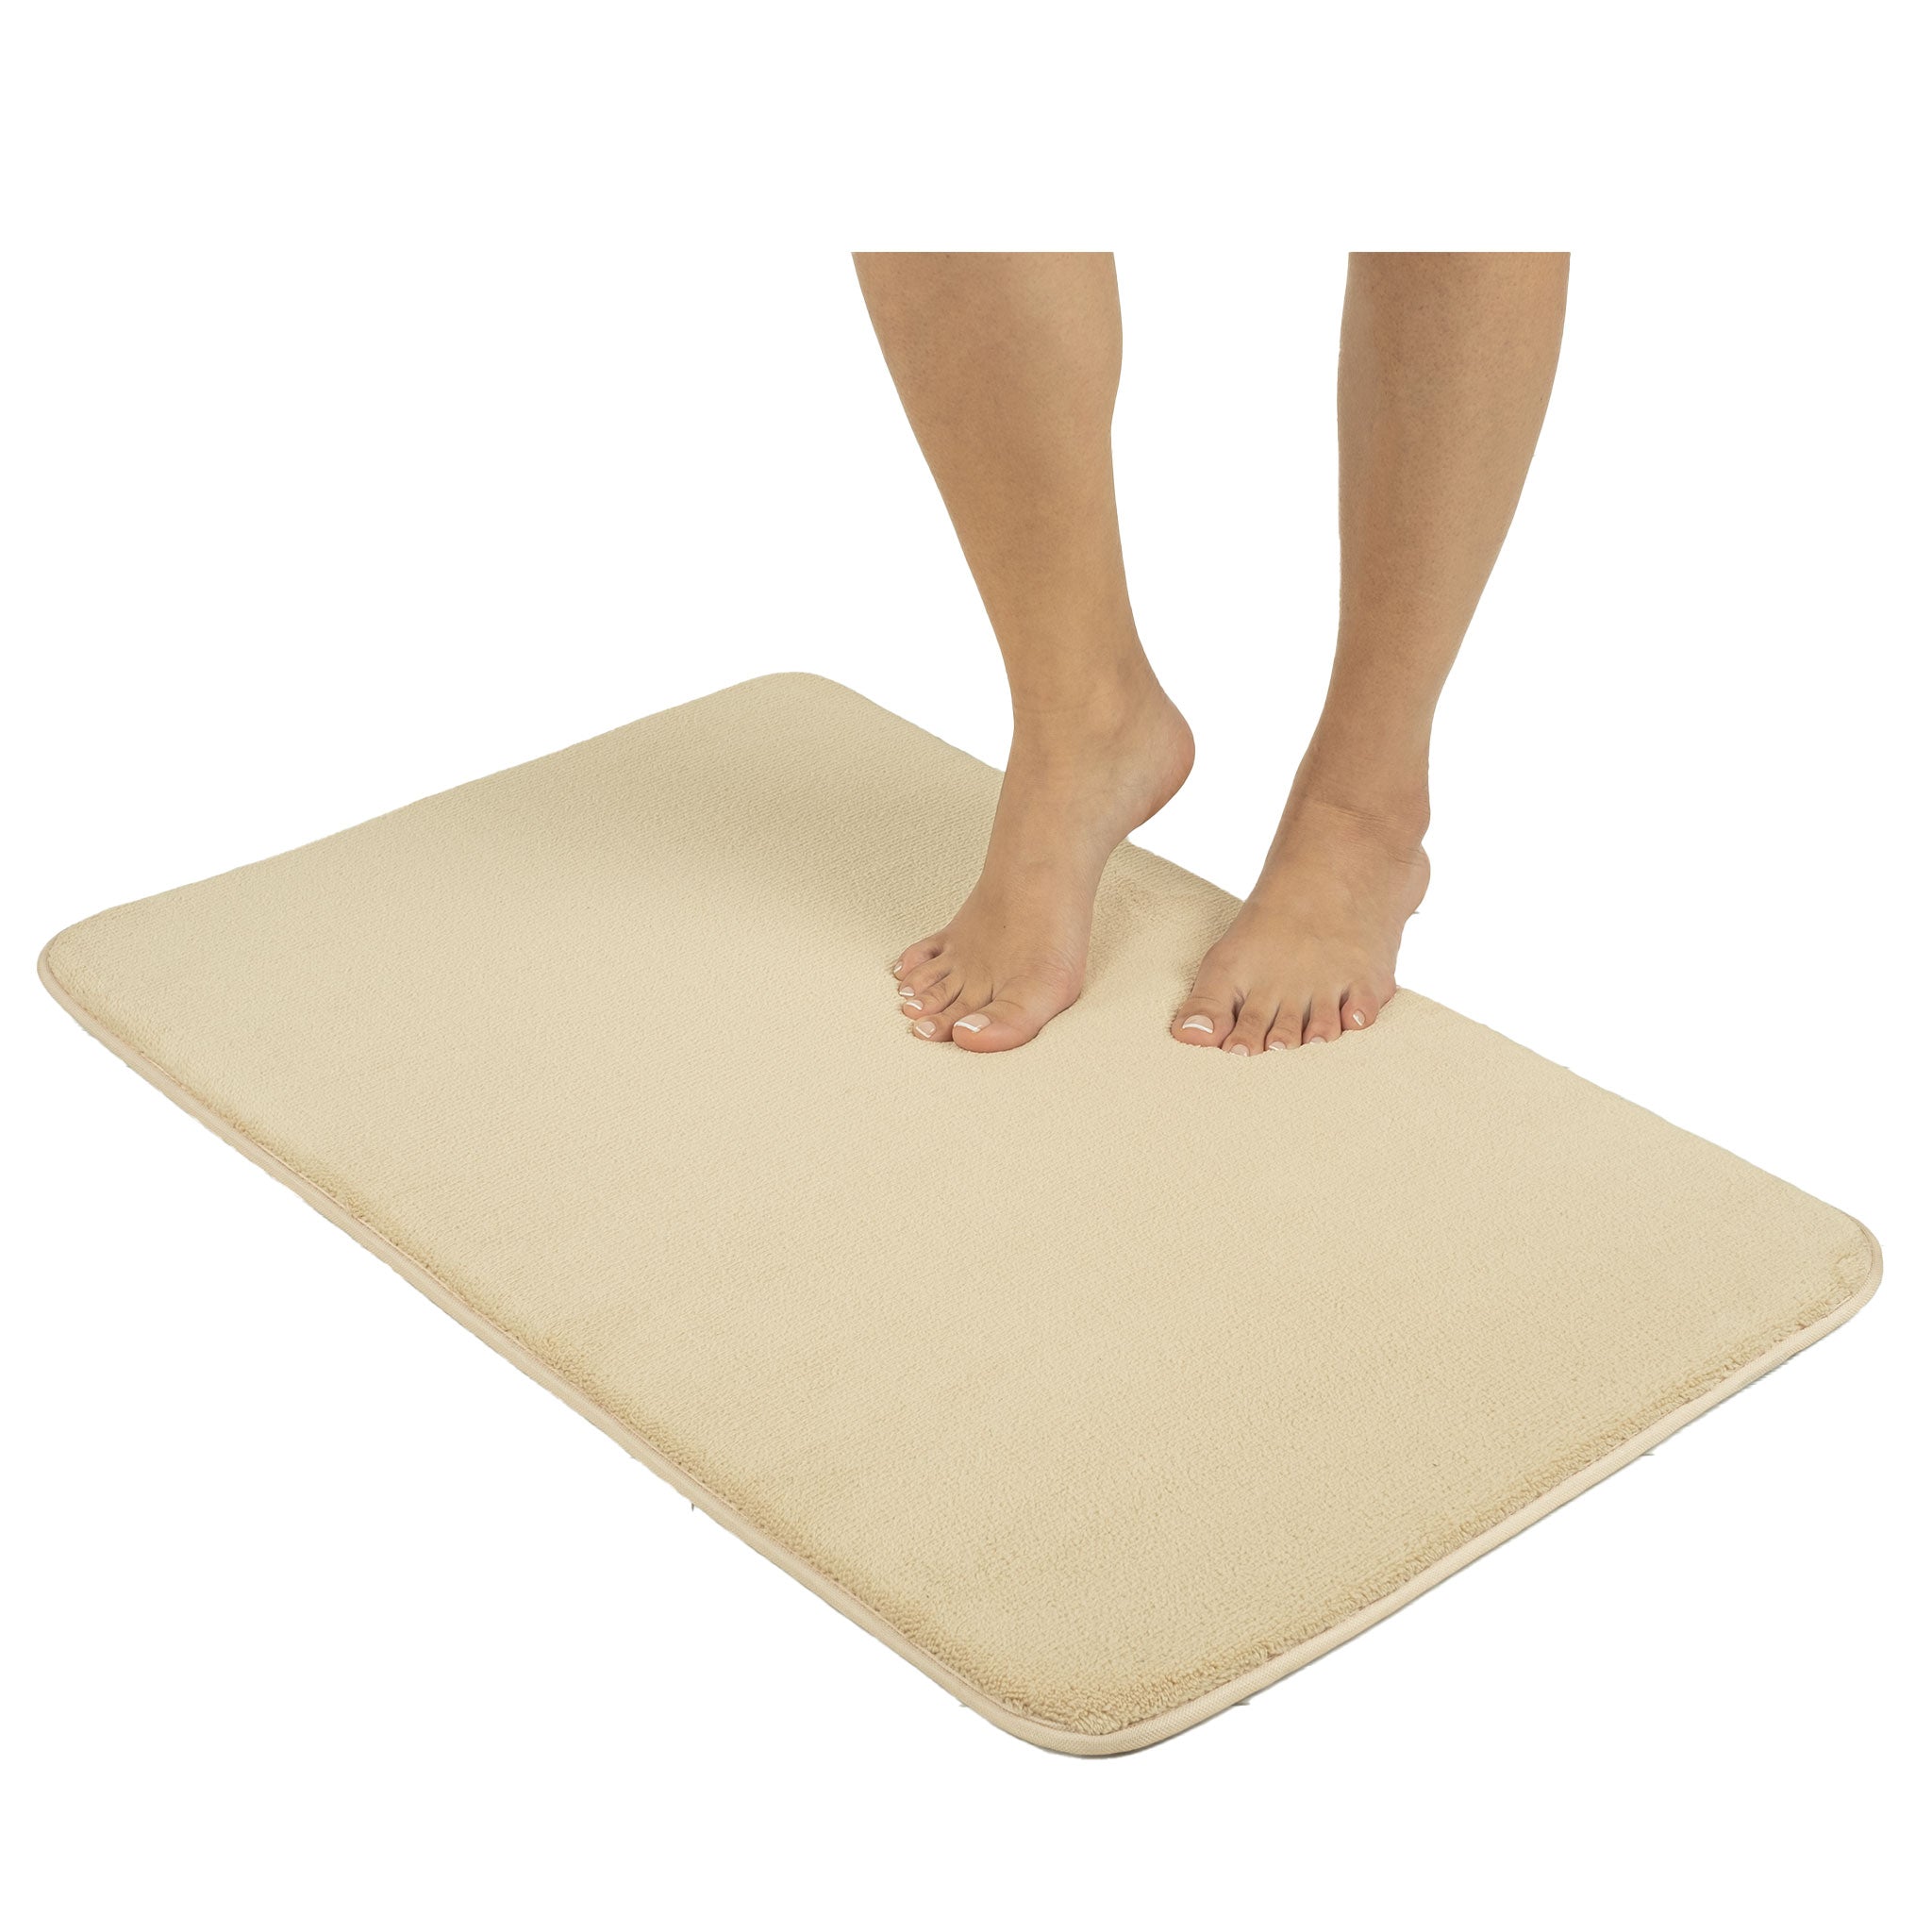 American Soft Linen - Fluffy Foamed Non-Slip Bath Rug 21x32 Inch -  18 Set Case Pack - Sand-Taupe - 1